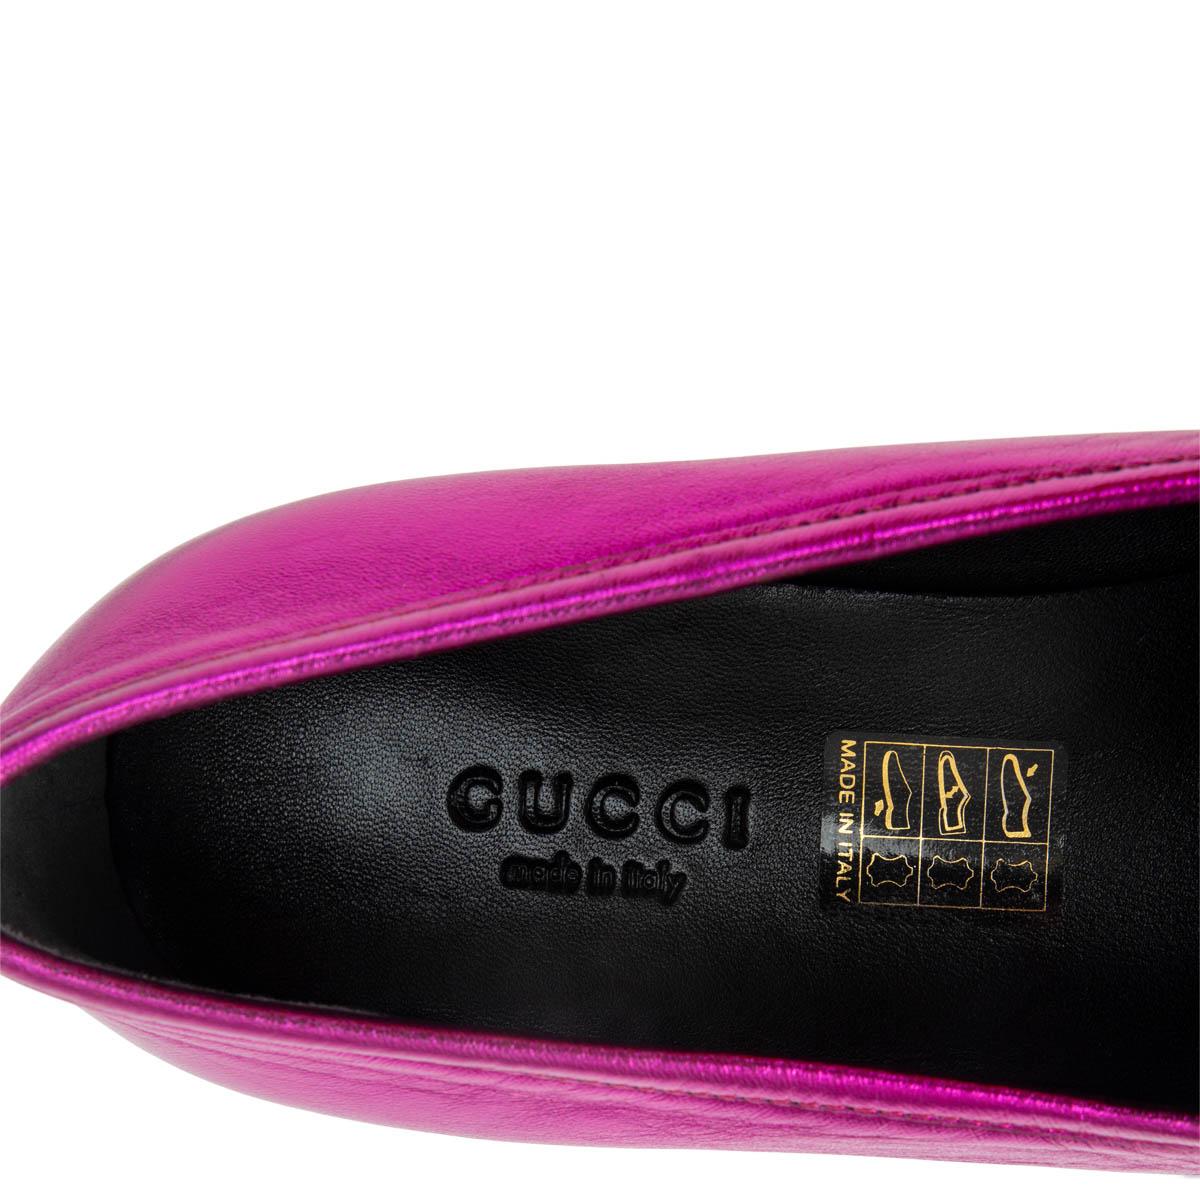 Pink GUCCI metallic pink leather JORDAAN Loafers Flats Shoes 37.5